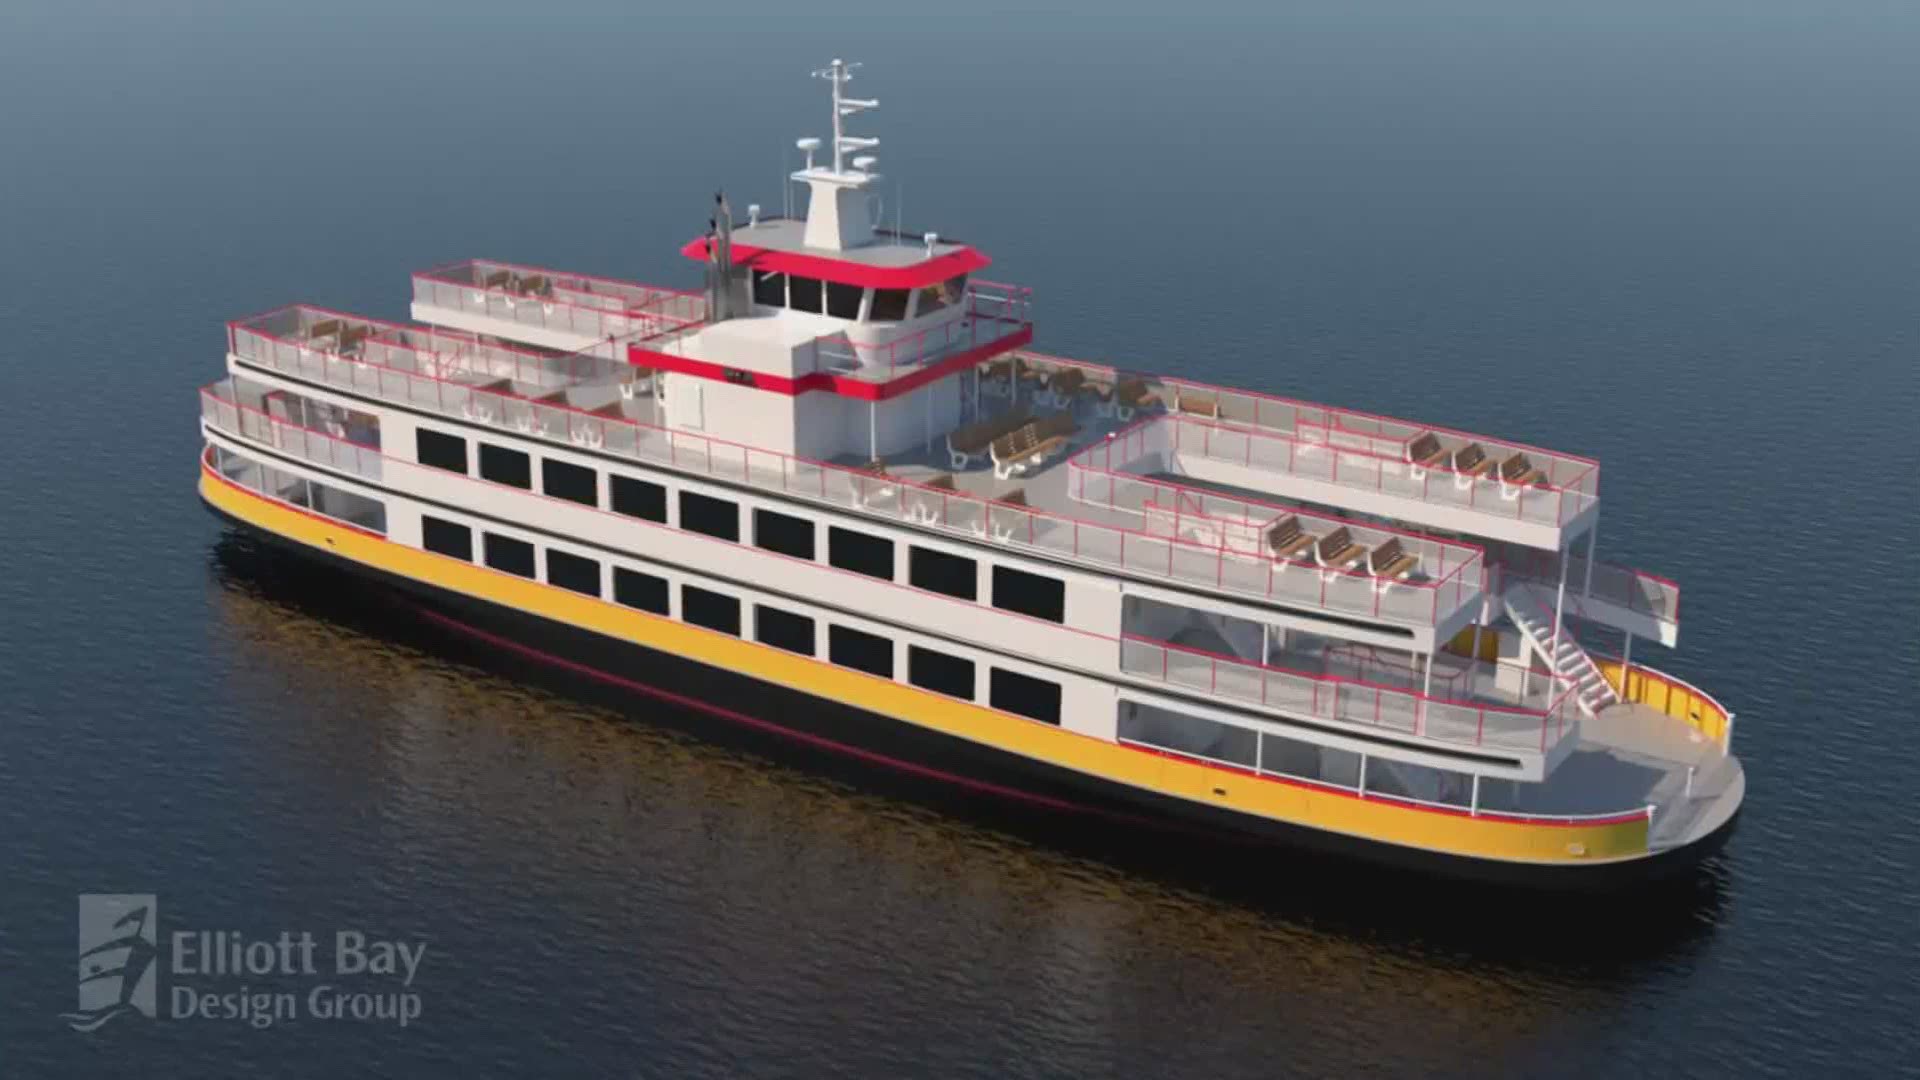 This story has been updated to reflect that the technology this ferry will use is a diesel-electric hybrid propulsion (not compulsion) system.